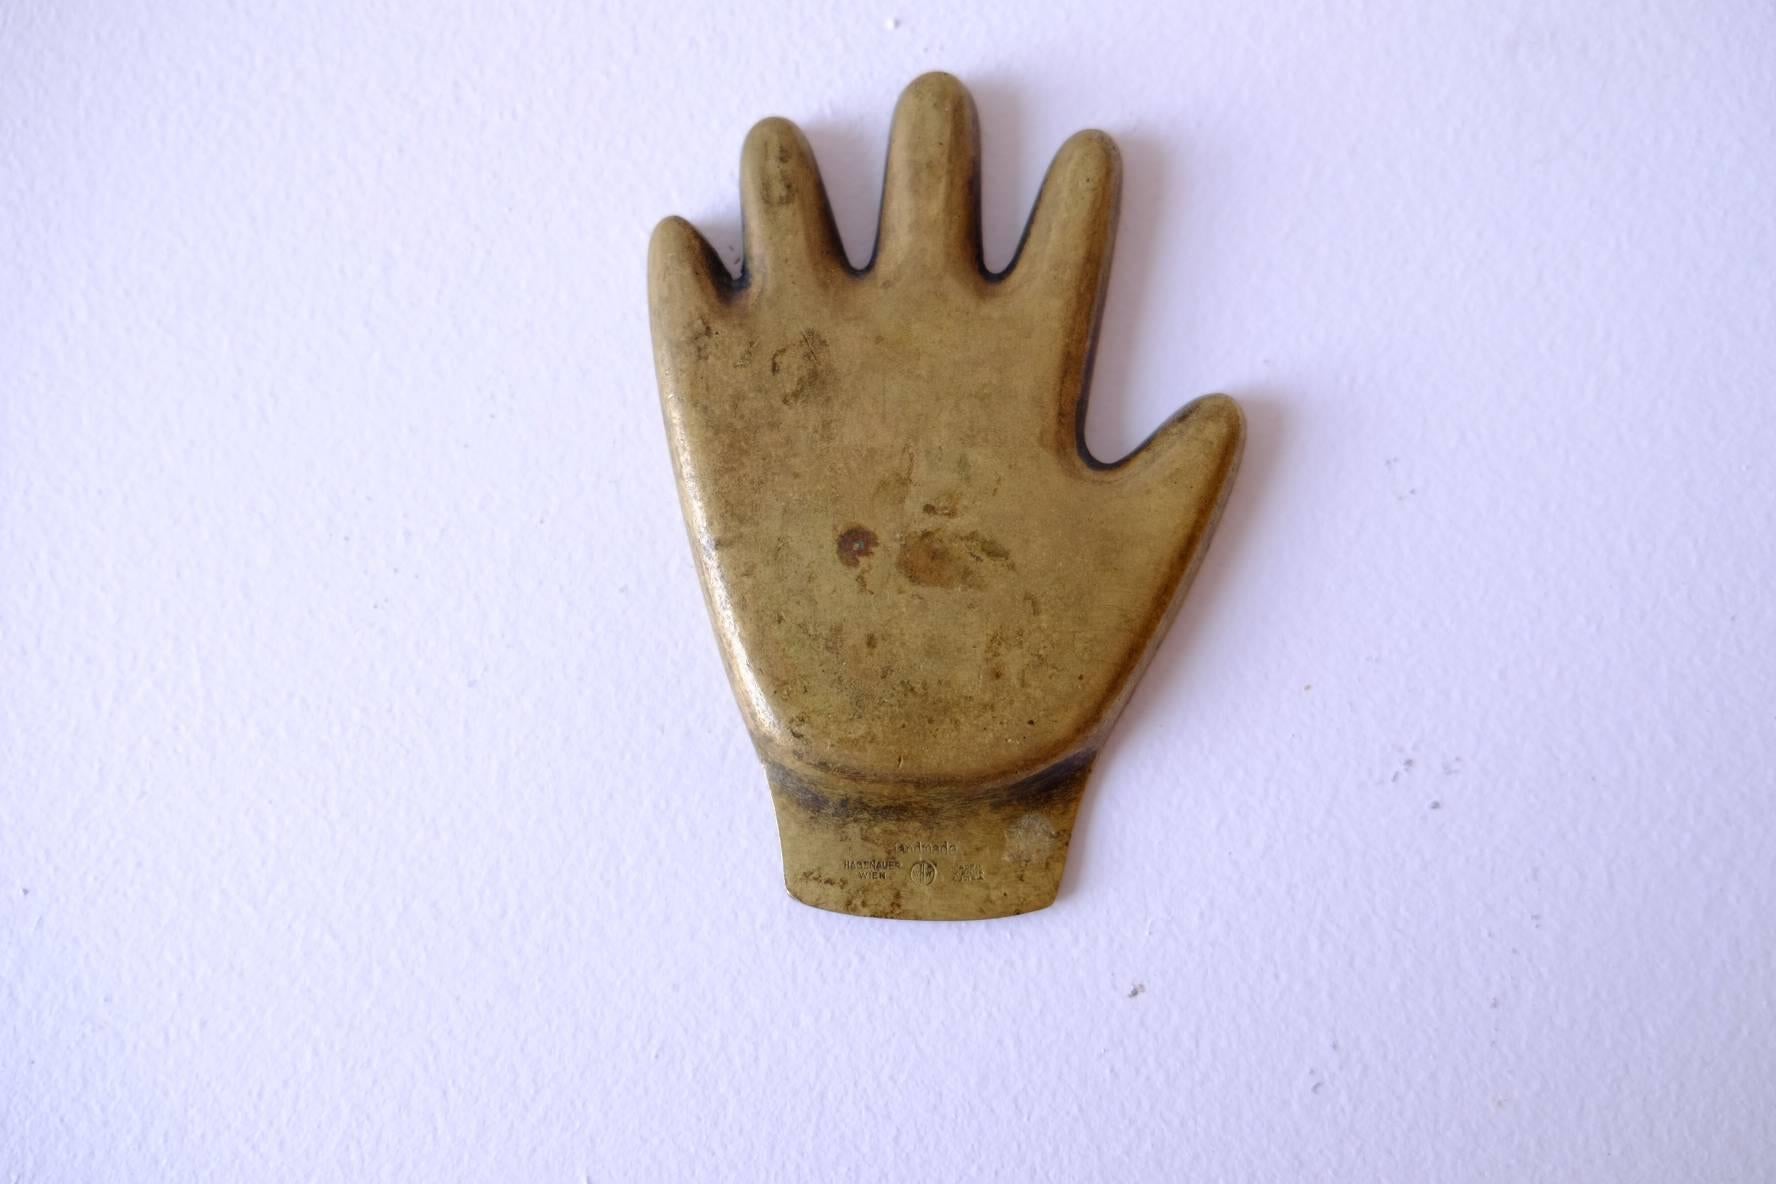 Hand shaped brass tray with patina by Hagenauer Werkstätte. Handmade and signed in Austria, circa 1940s.